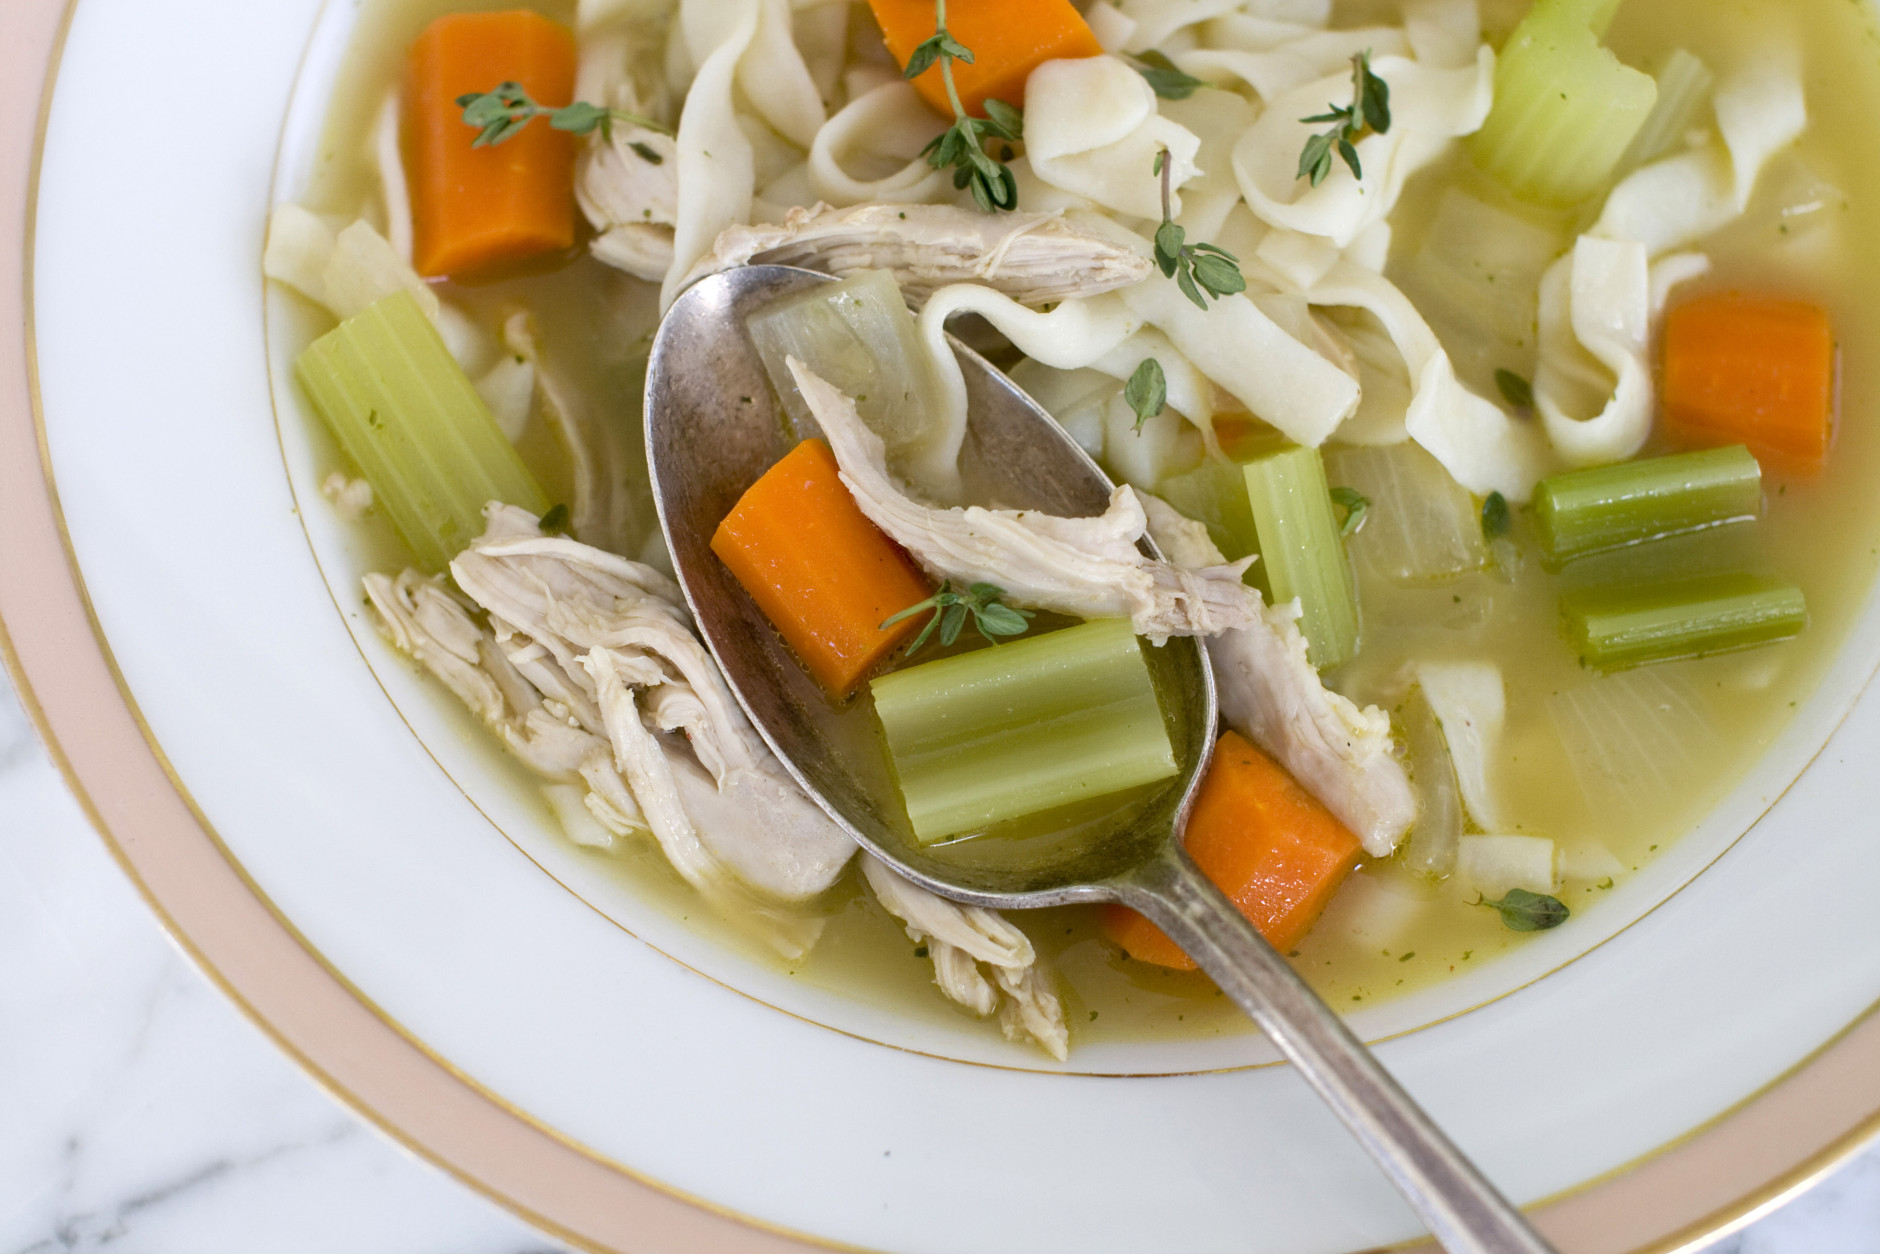 This Nov. 21, 2011 photo shows Rocco DiSpirito's recipe for chicken noodle soup in Concord, N.H. This soup uses real chicken and fresh vegetables, like carrots and onions, which are a great source of vitamins.    (AP Photo/Matthew Mead)